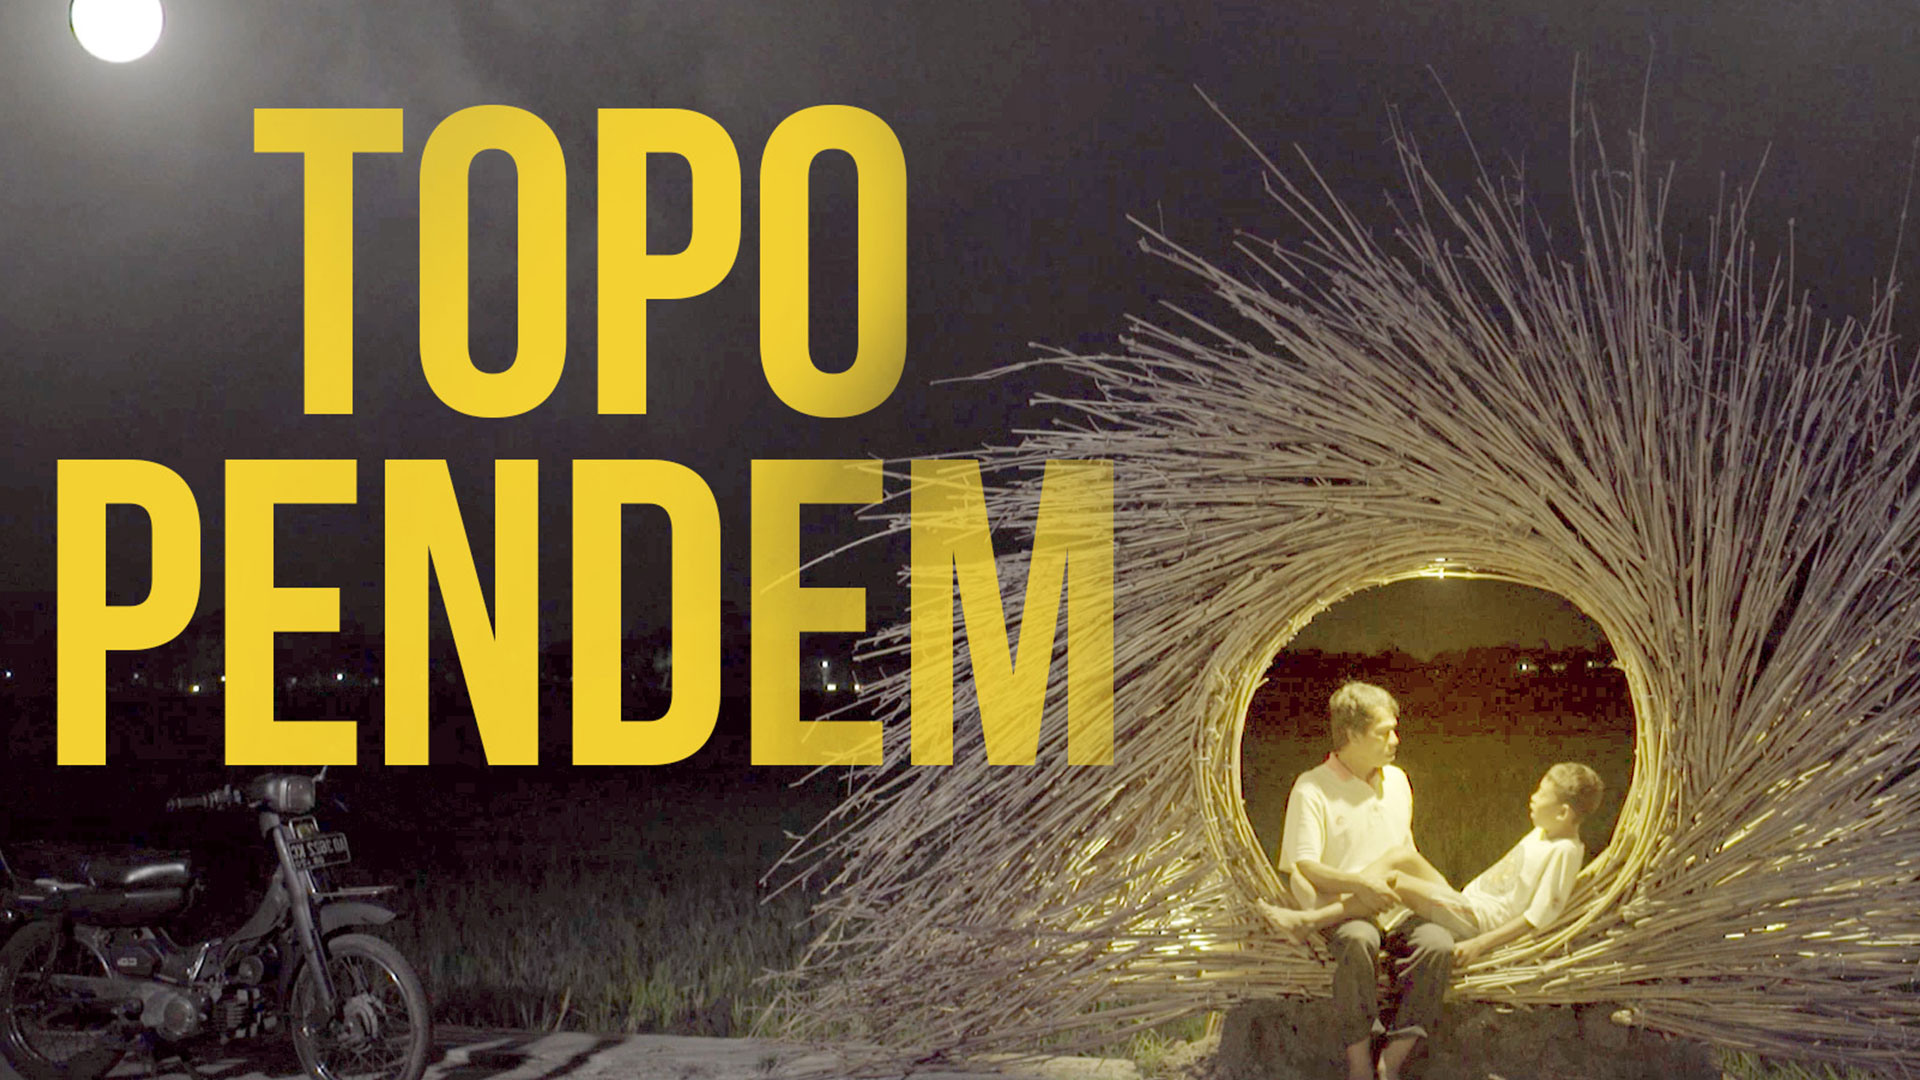 TOPO PENDEM (MERGED WITH THE GROUND)